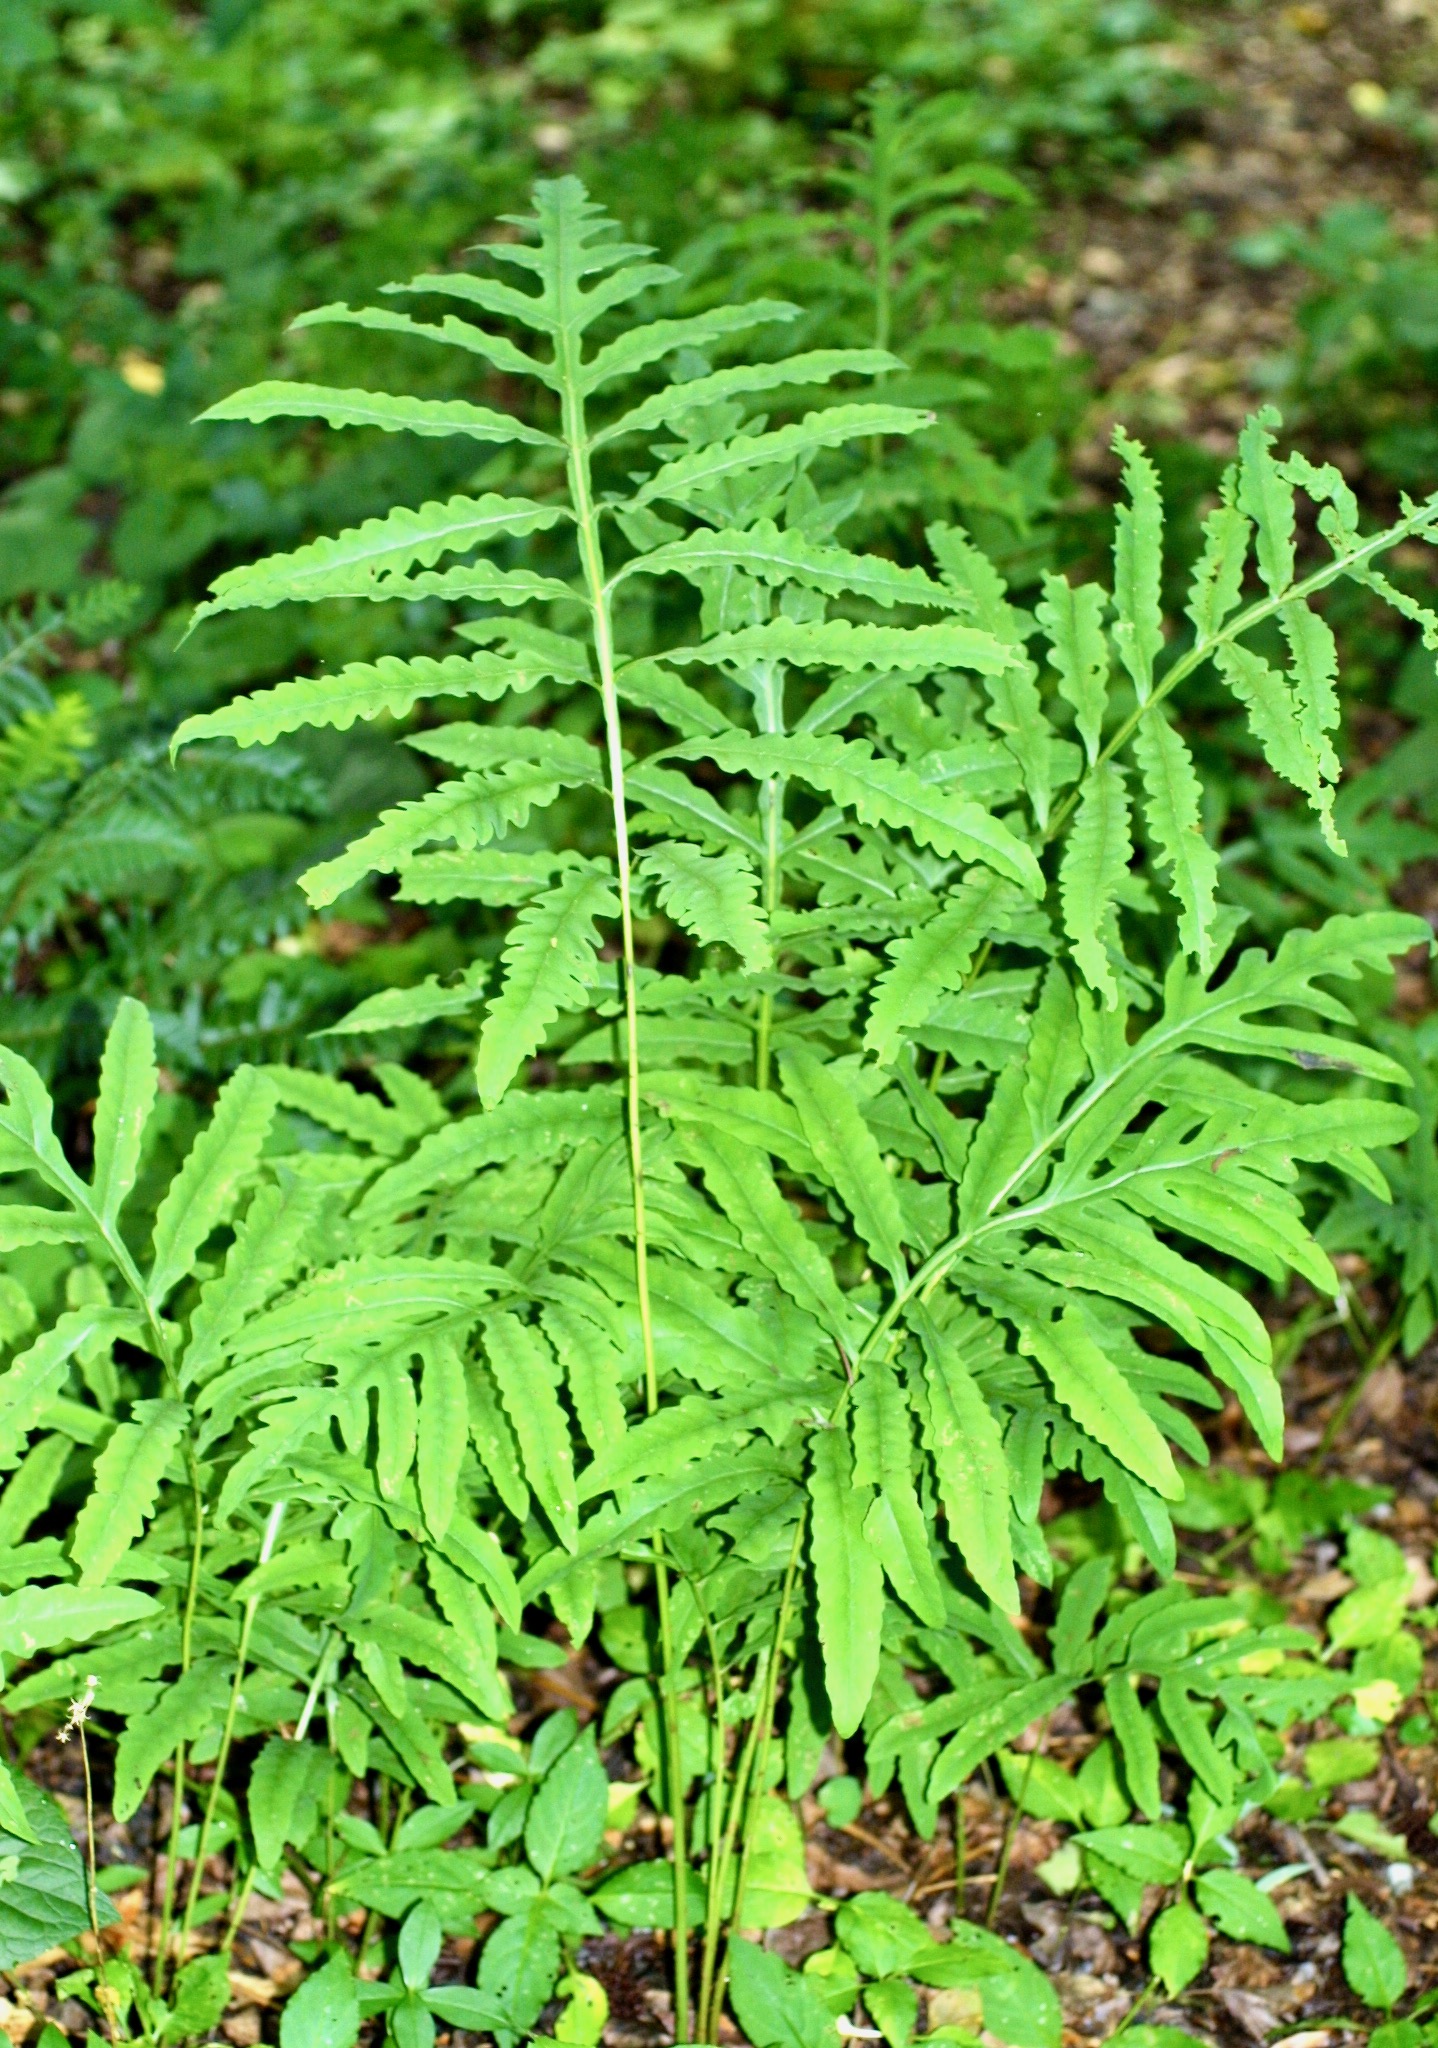 The Scientific Name is Onoclea sensibilis. You will likely hear them called Sensitive fern. This picture shows the Coarse, spreading fern; pinnae have wavy, untoothed margins, with leafy tissue on the upper portion of the rachis. of Onoclea sensibilis